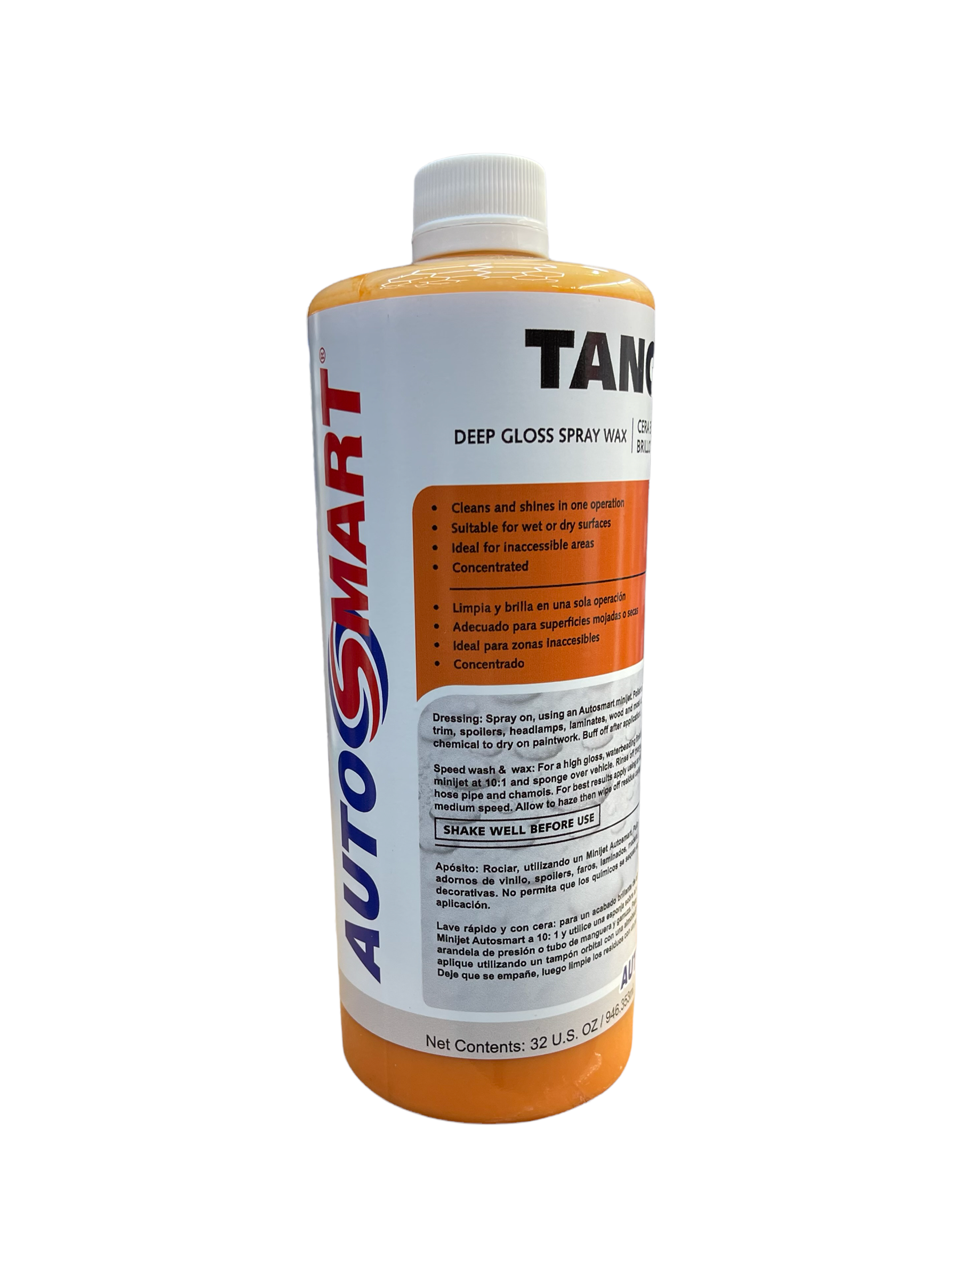 Tango - Deep Gloss Spraywax 1qtA unique versatile spray wax and cleaner. Quickly cleans out soiling and leaves a wet look shine on door jambs, under hood and trunk areas etc. Turns any hydrophillic surface to hydrophobic (non water-beading to water-beadin